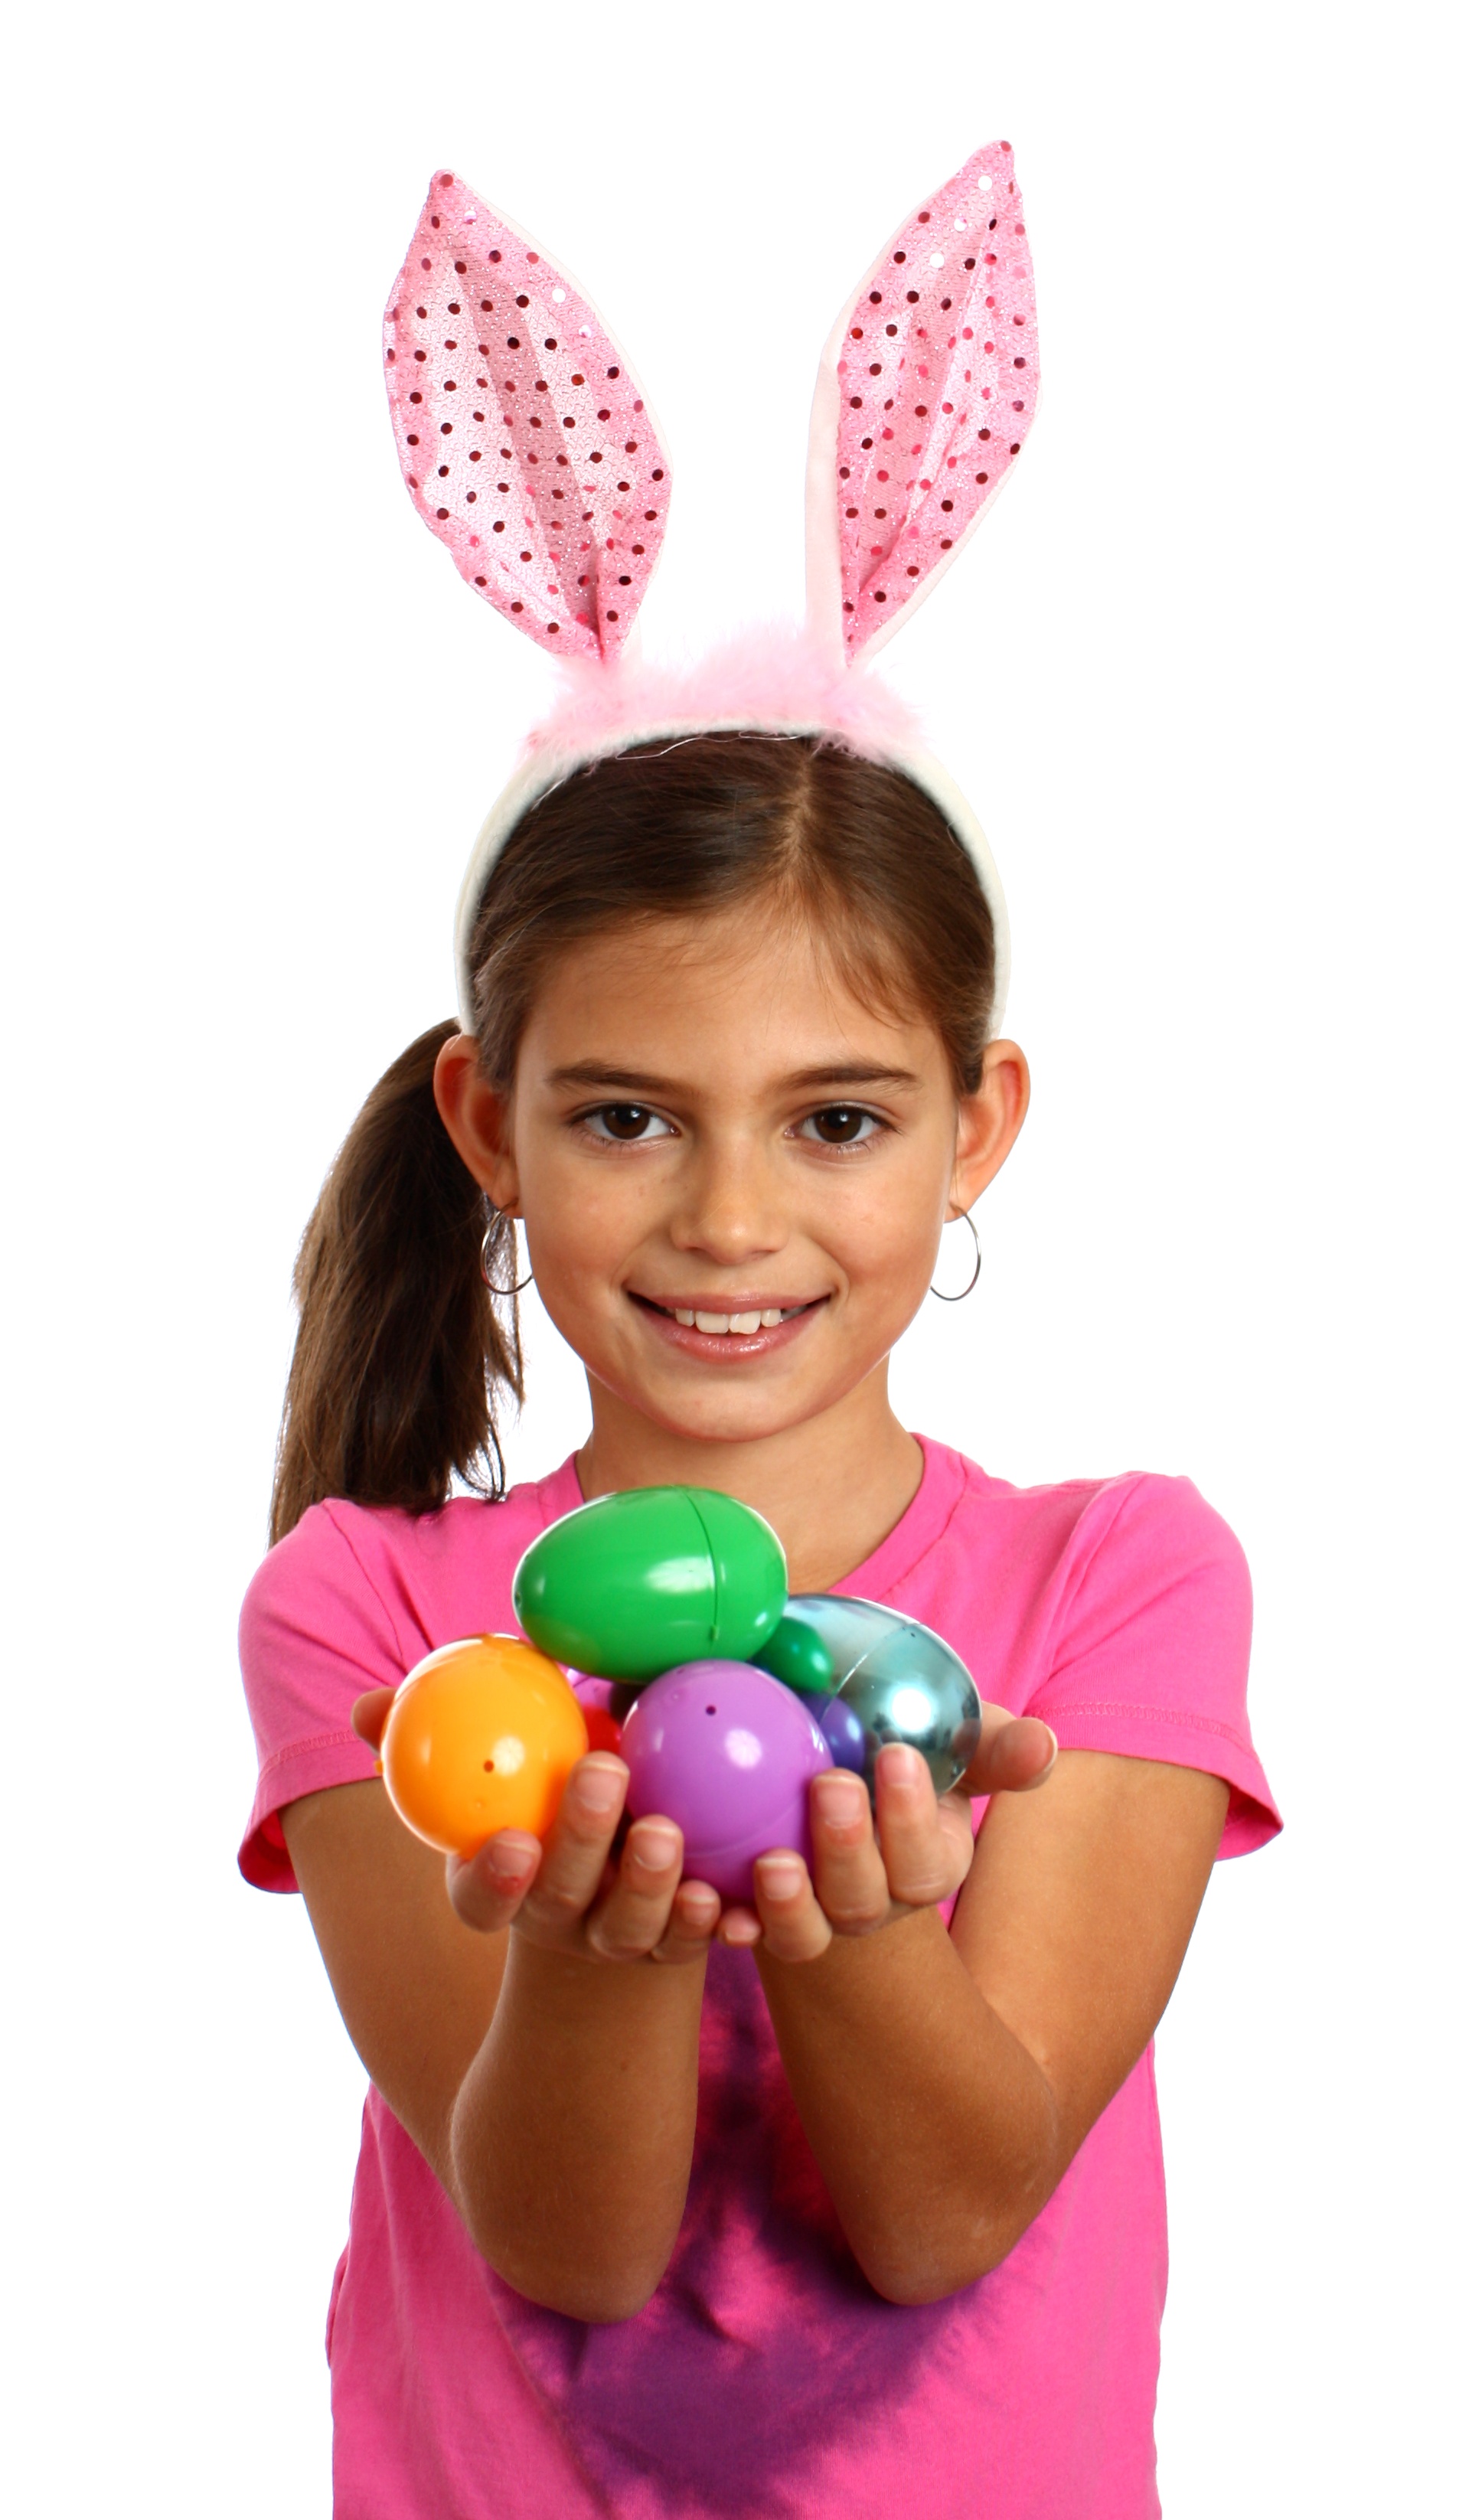 A cute young girl holding Easter eggs, Animals, Holidays, Themes, Symbols, HQ Photo